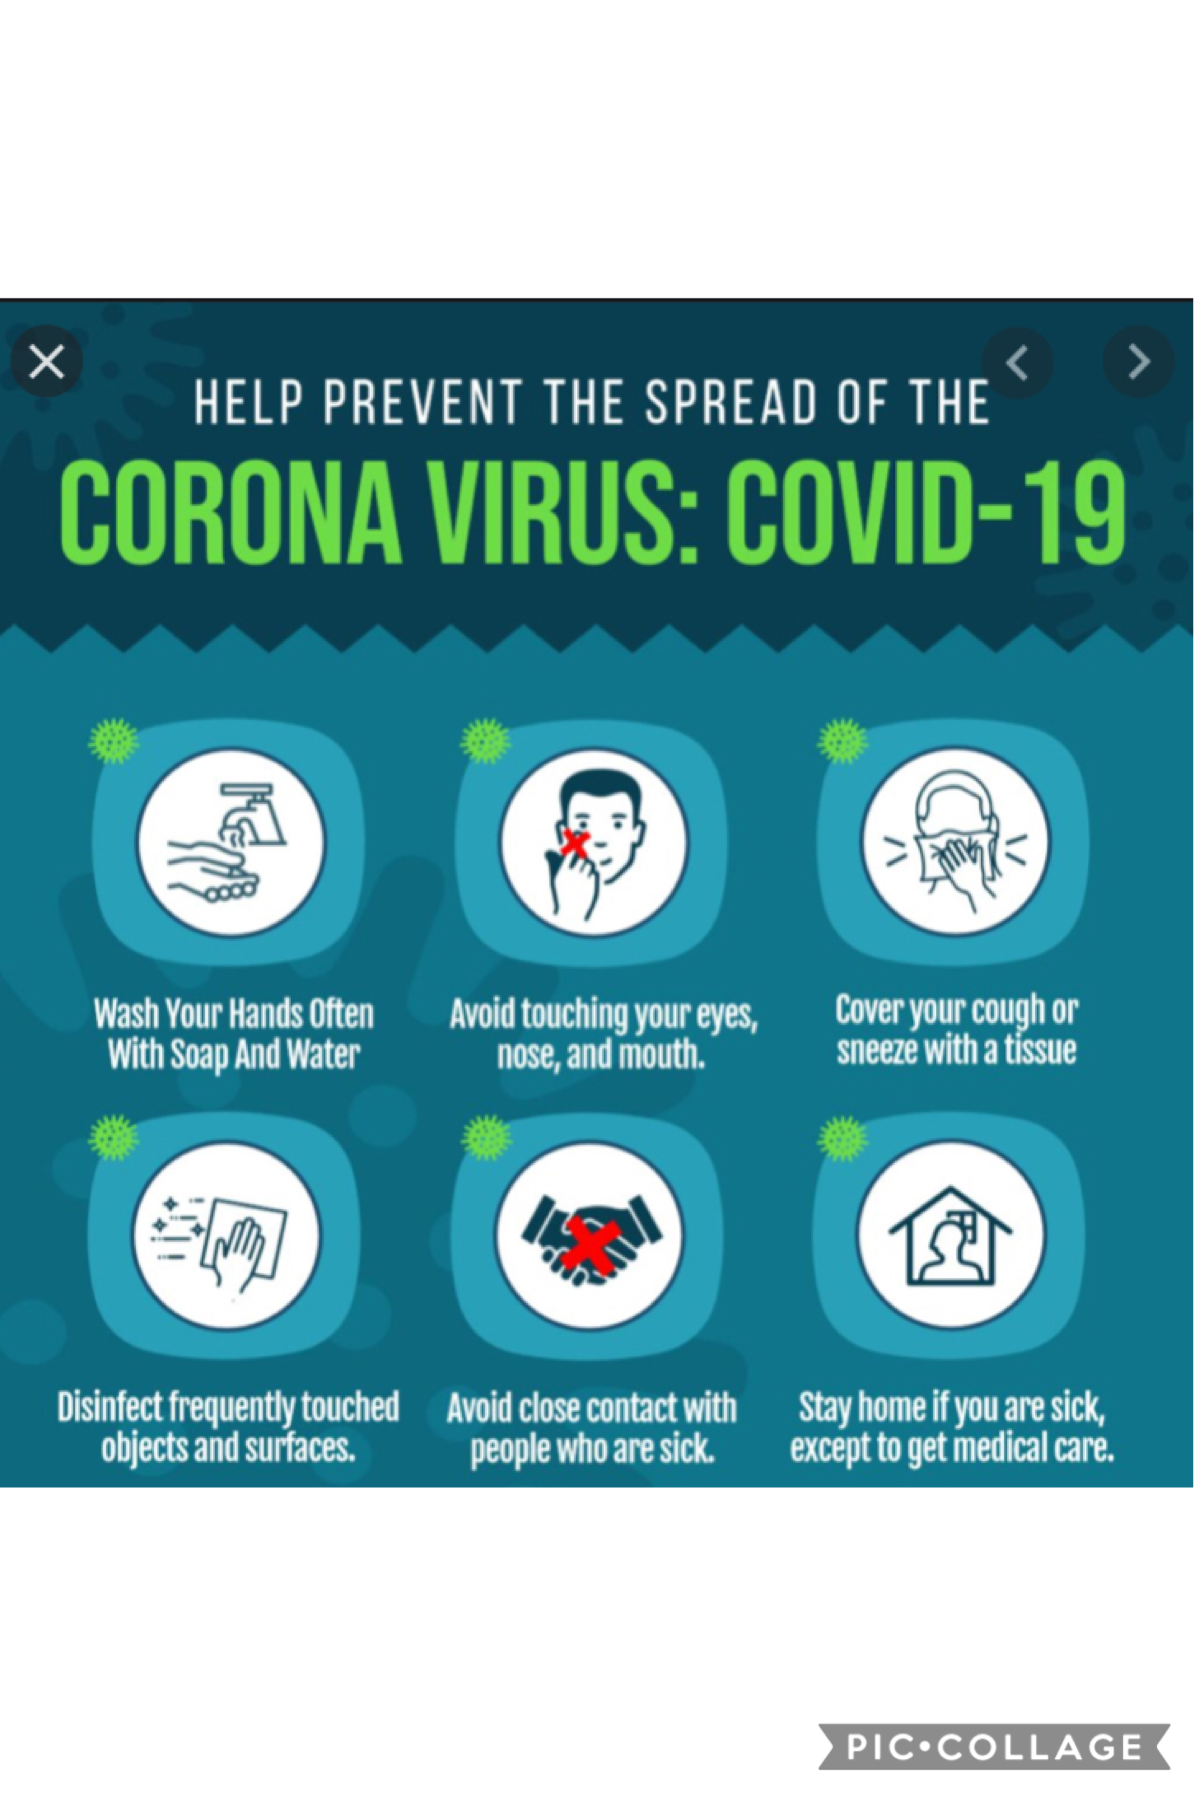 How to prevent COVID 19